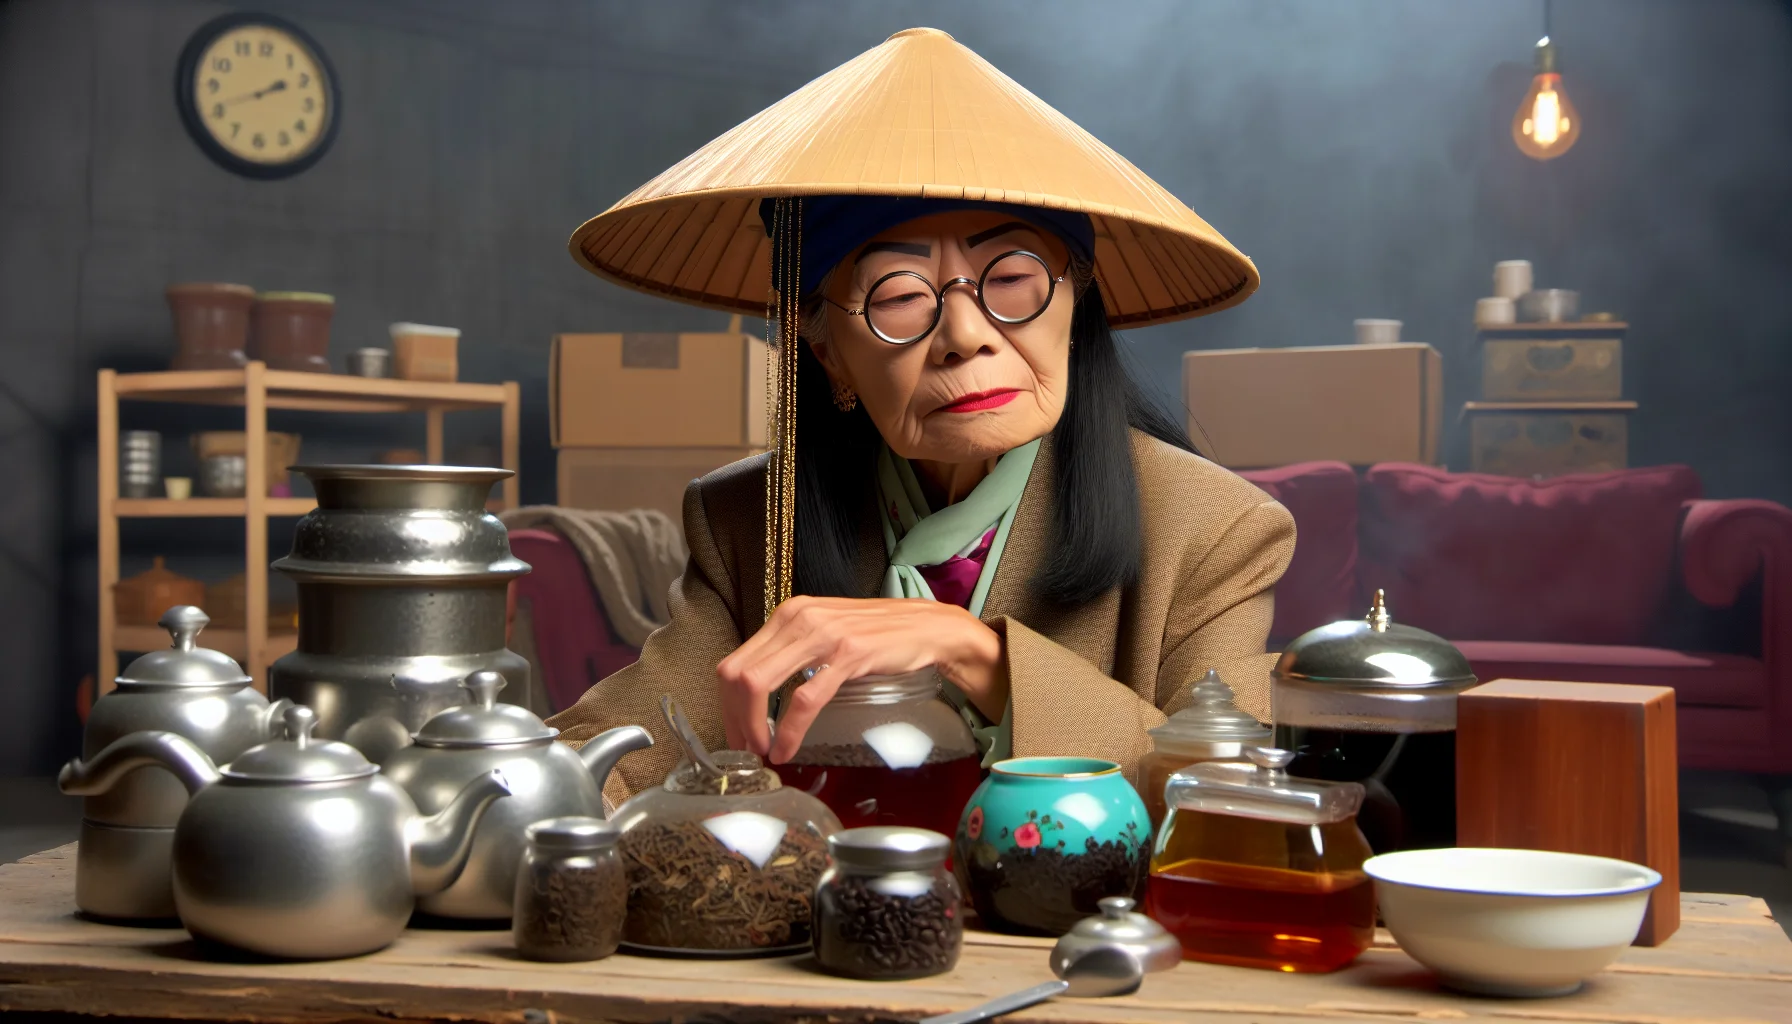 Create a realistic image of a funny scenario featuring a middle-aged Asian woman humorous persona, identified as Kakay Espiritu- a similar figure, engaged in enticing activities related to tea and coffee brewing. The scene should highlight a wide array of brewing products and the atmosphere of wisdom surrounding the realm of brewing. Note: Nobody involved in the scene should bear resemblance to any specific real-life individuals.